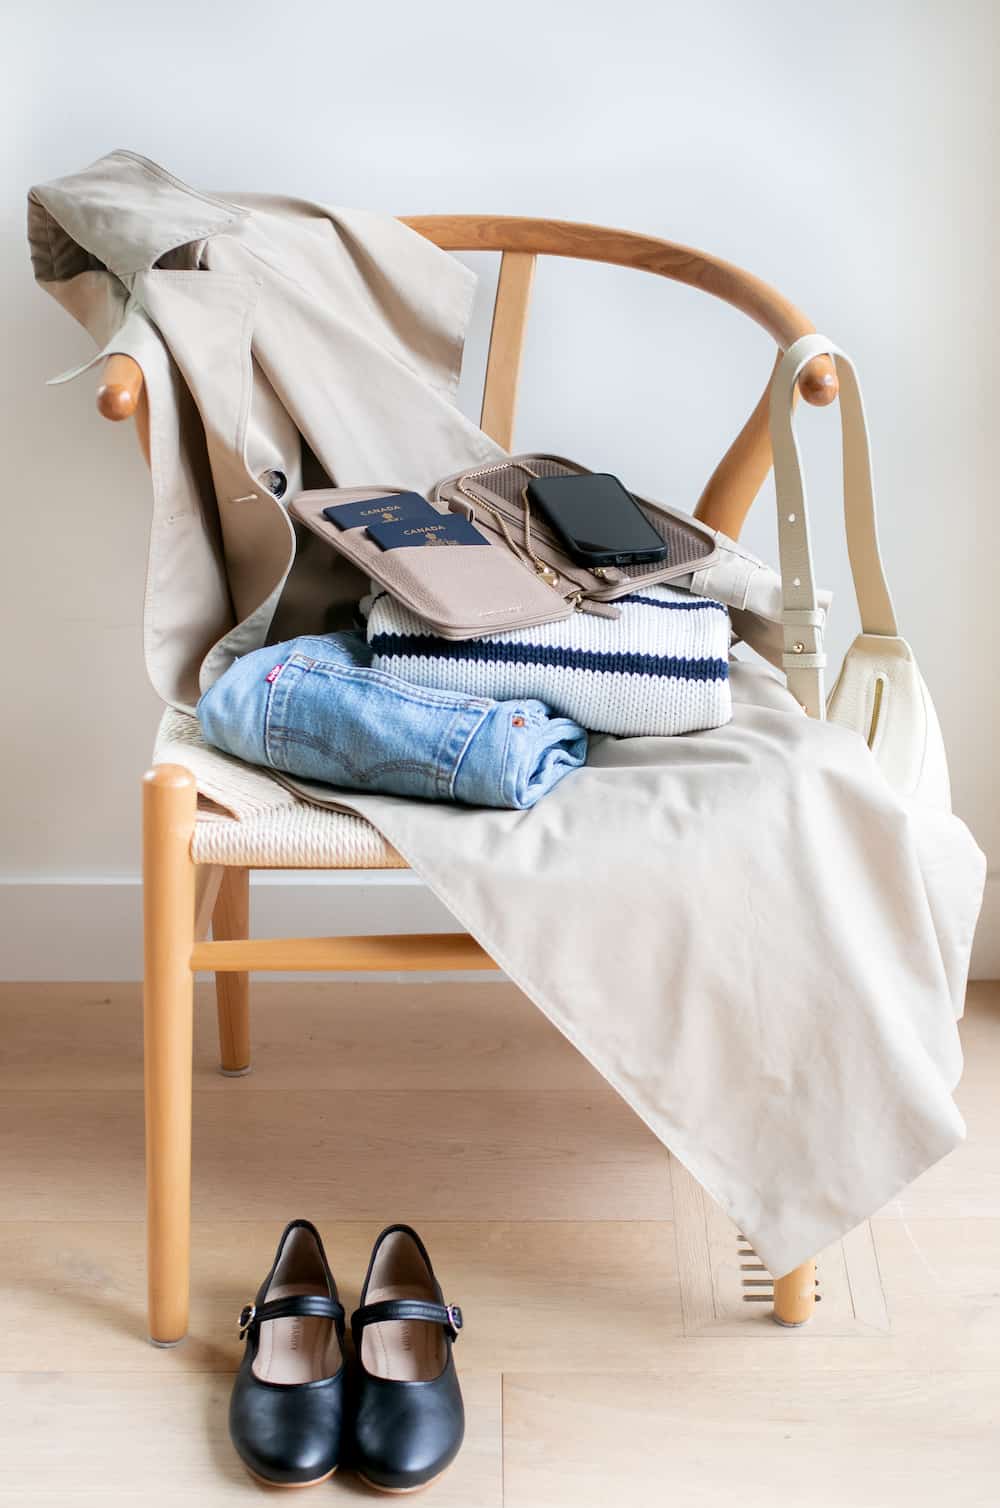 image of a wishbone chair with a trench coat slung over, a leather bag on the arm, and folded clothing with a tan passport holder on top